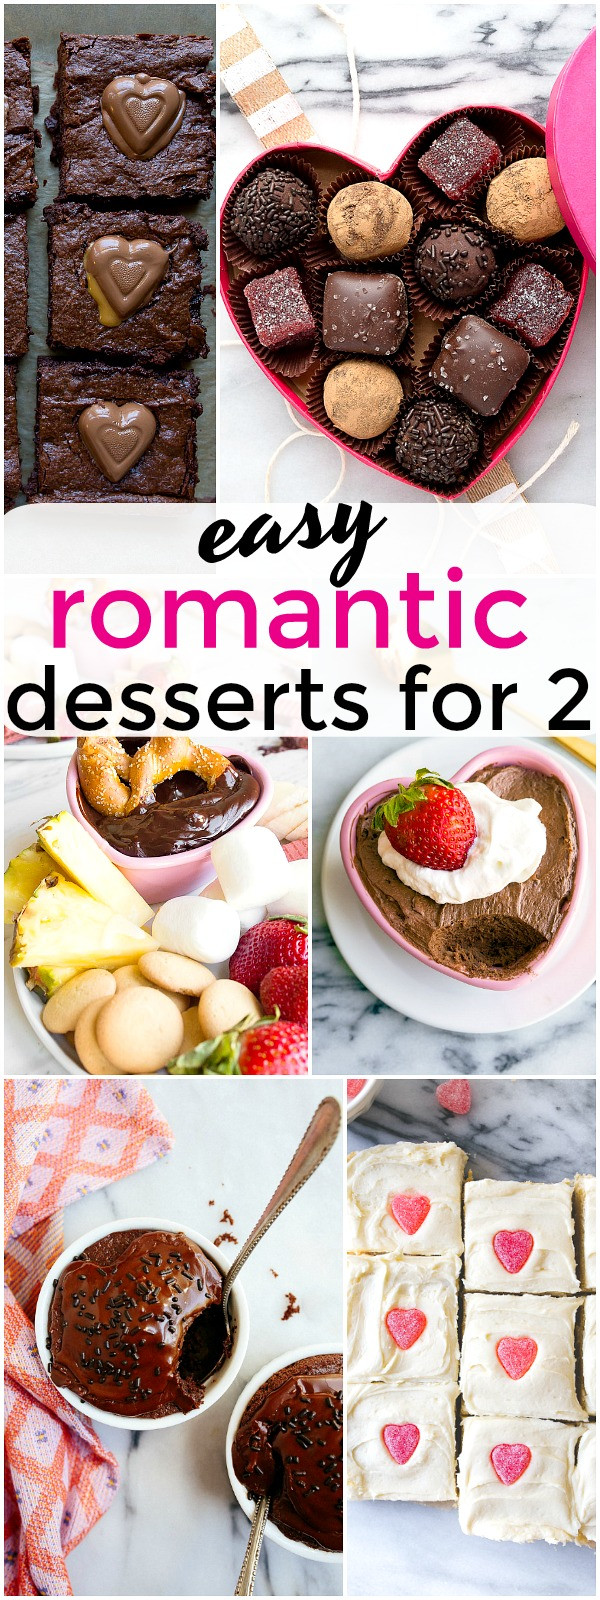 Valentines Desserts For Two
 Easy Romantic Desserts for Two People on Valentine s Day